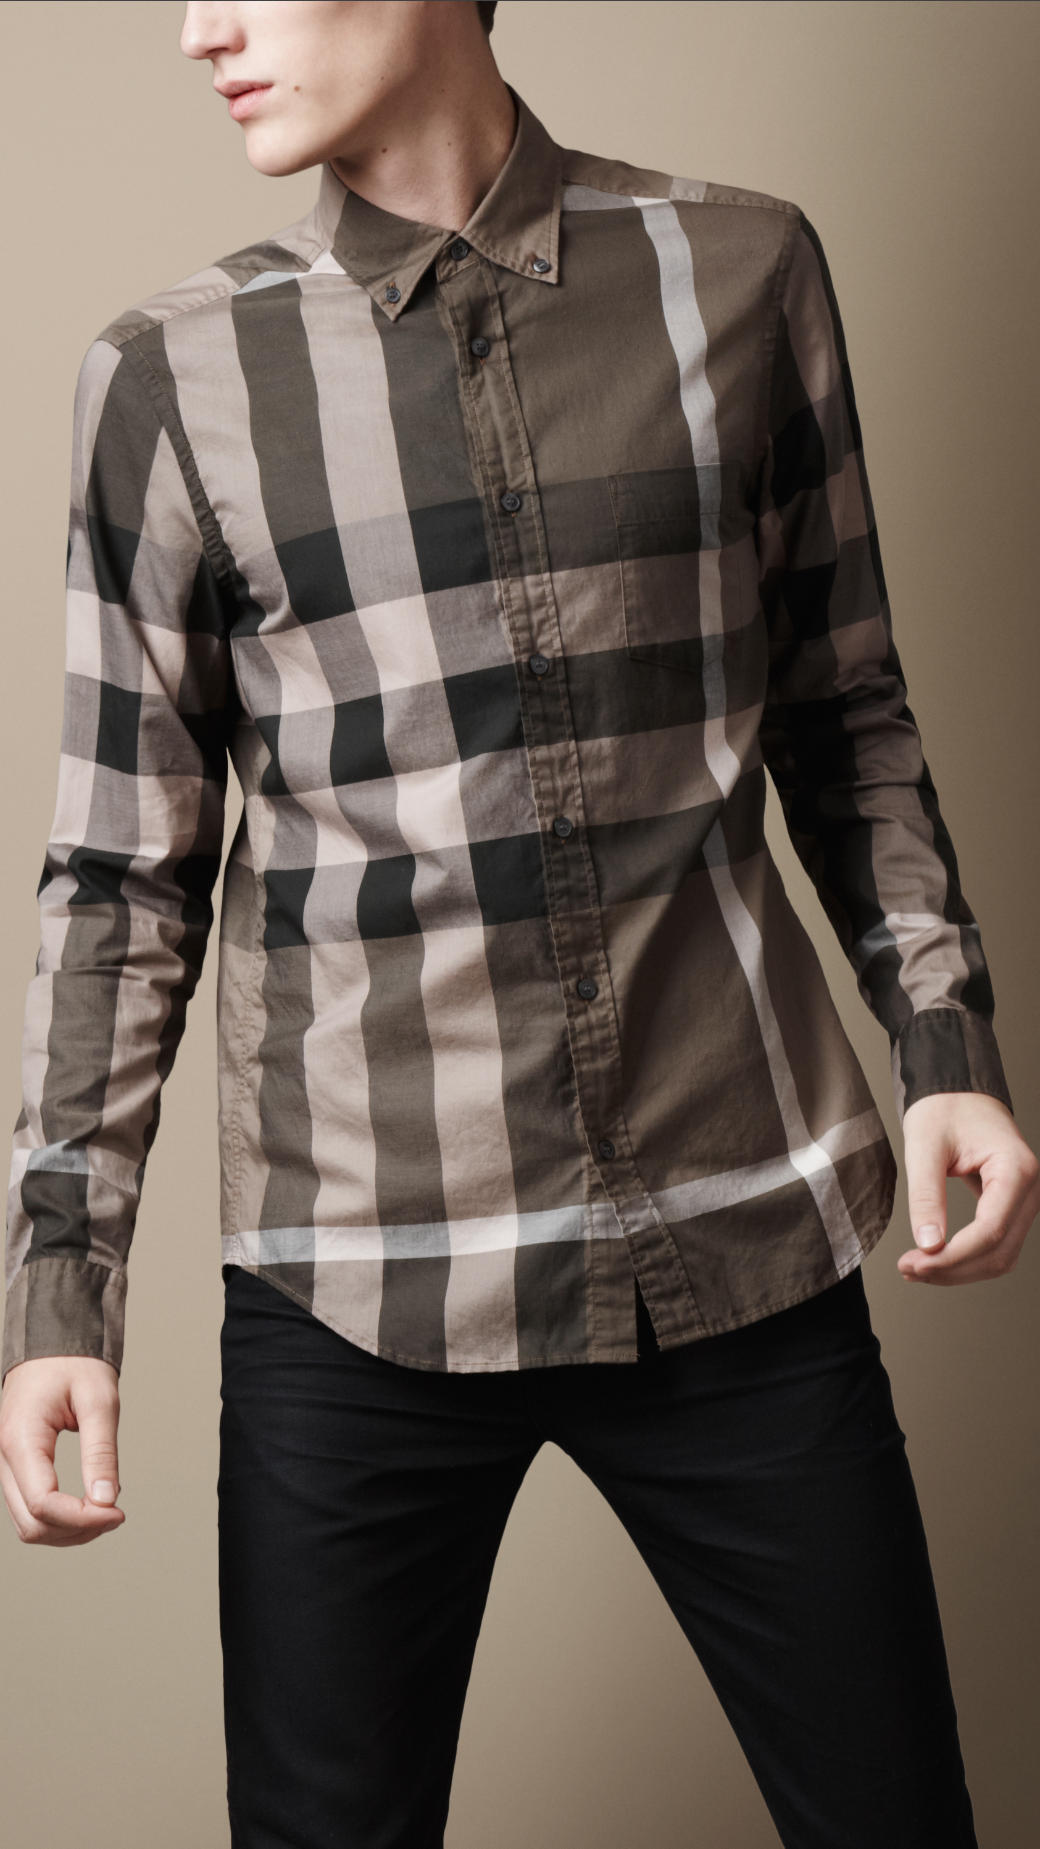 Lyst - Burberry Giant Exploded Check Cotton Shirt in Brown for Men